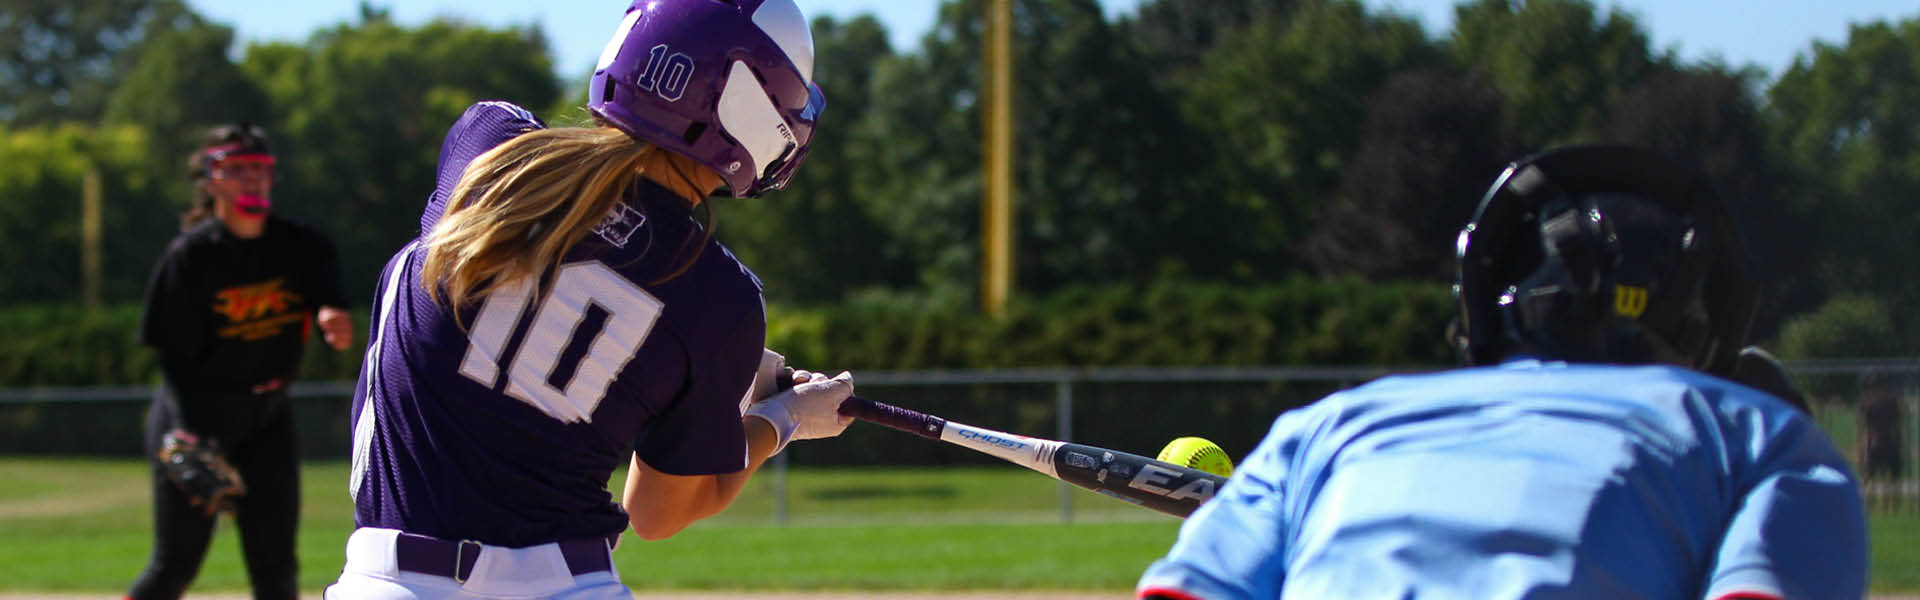 Western Mustangs softball player batting at home plate